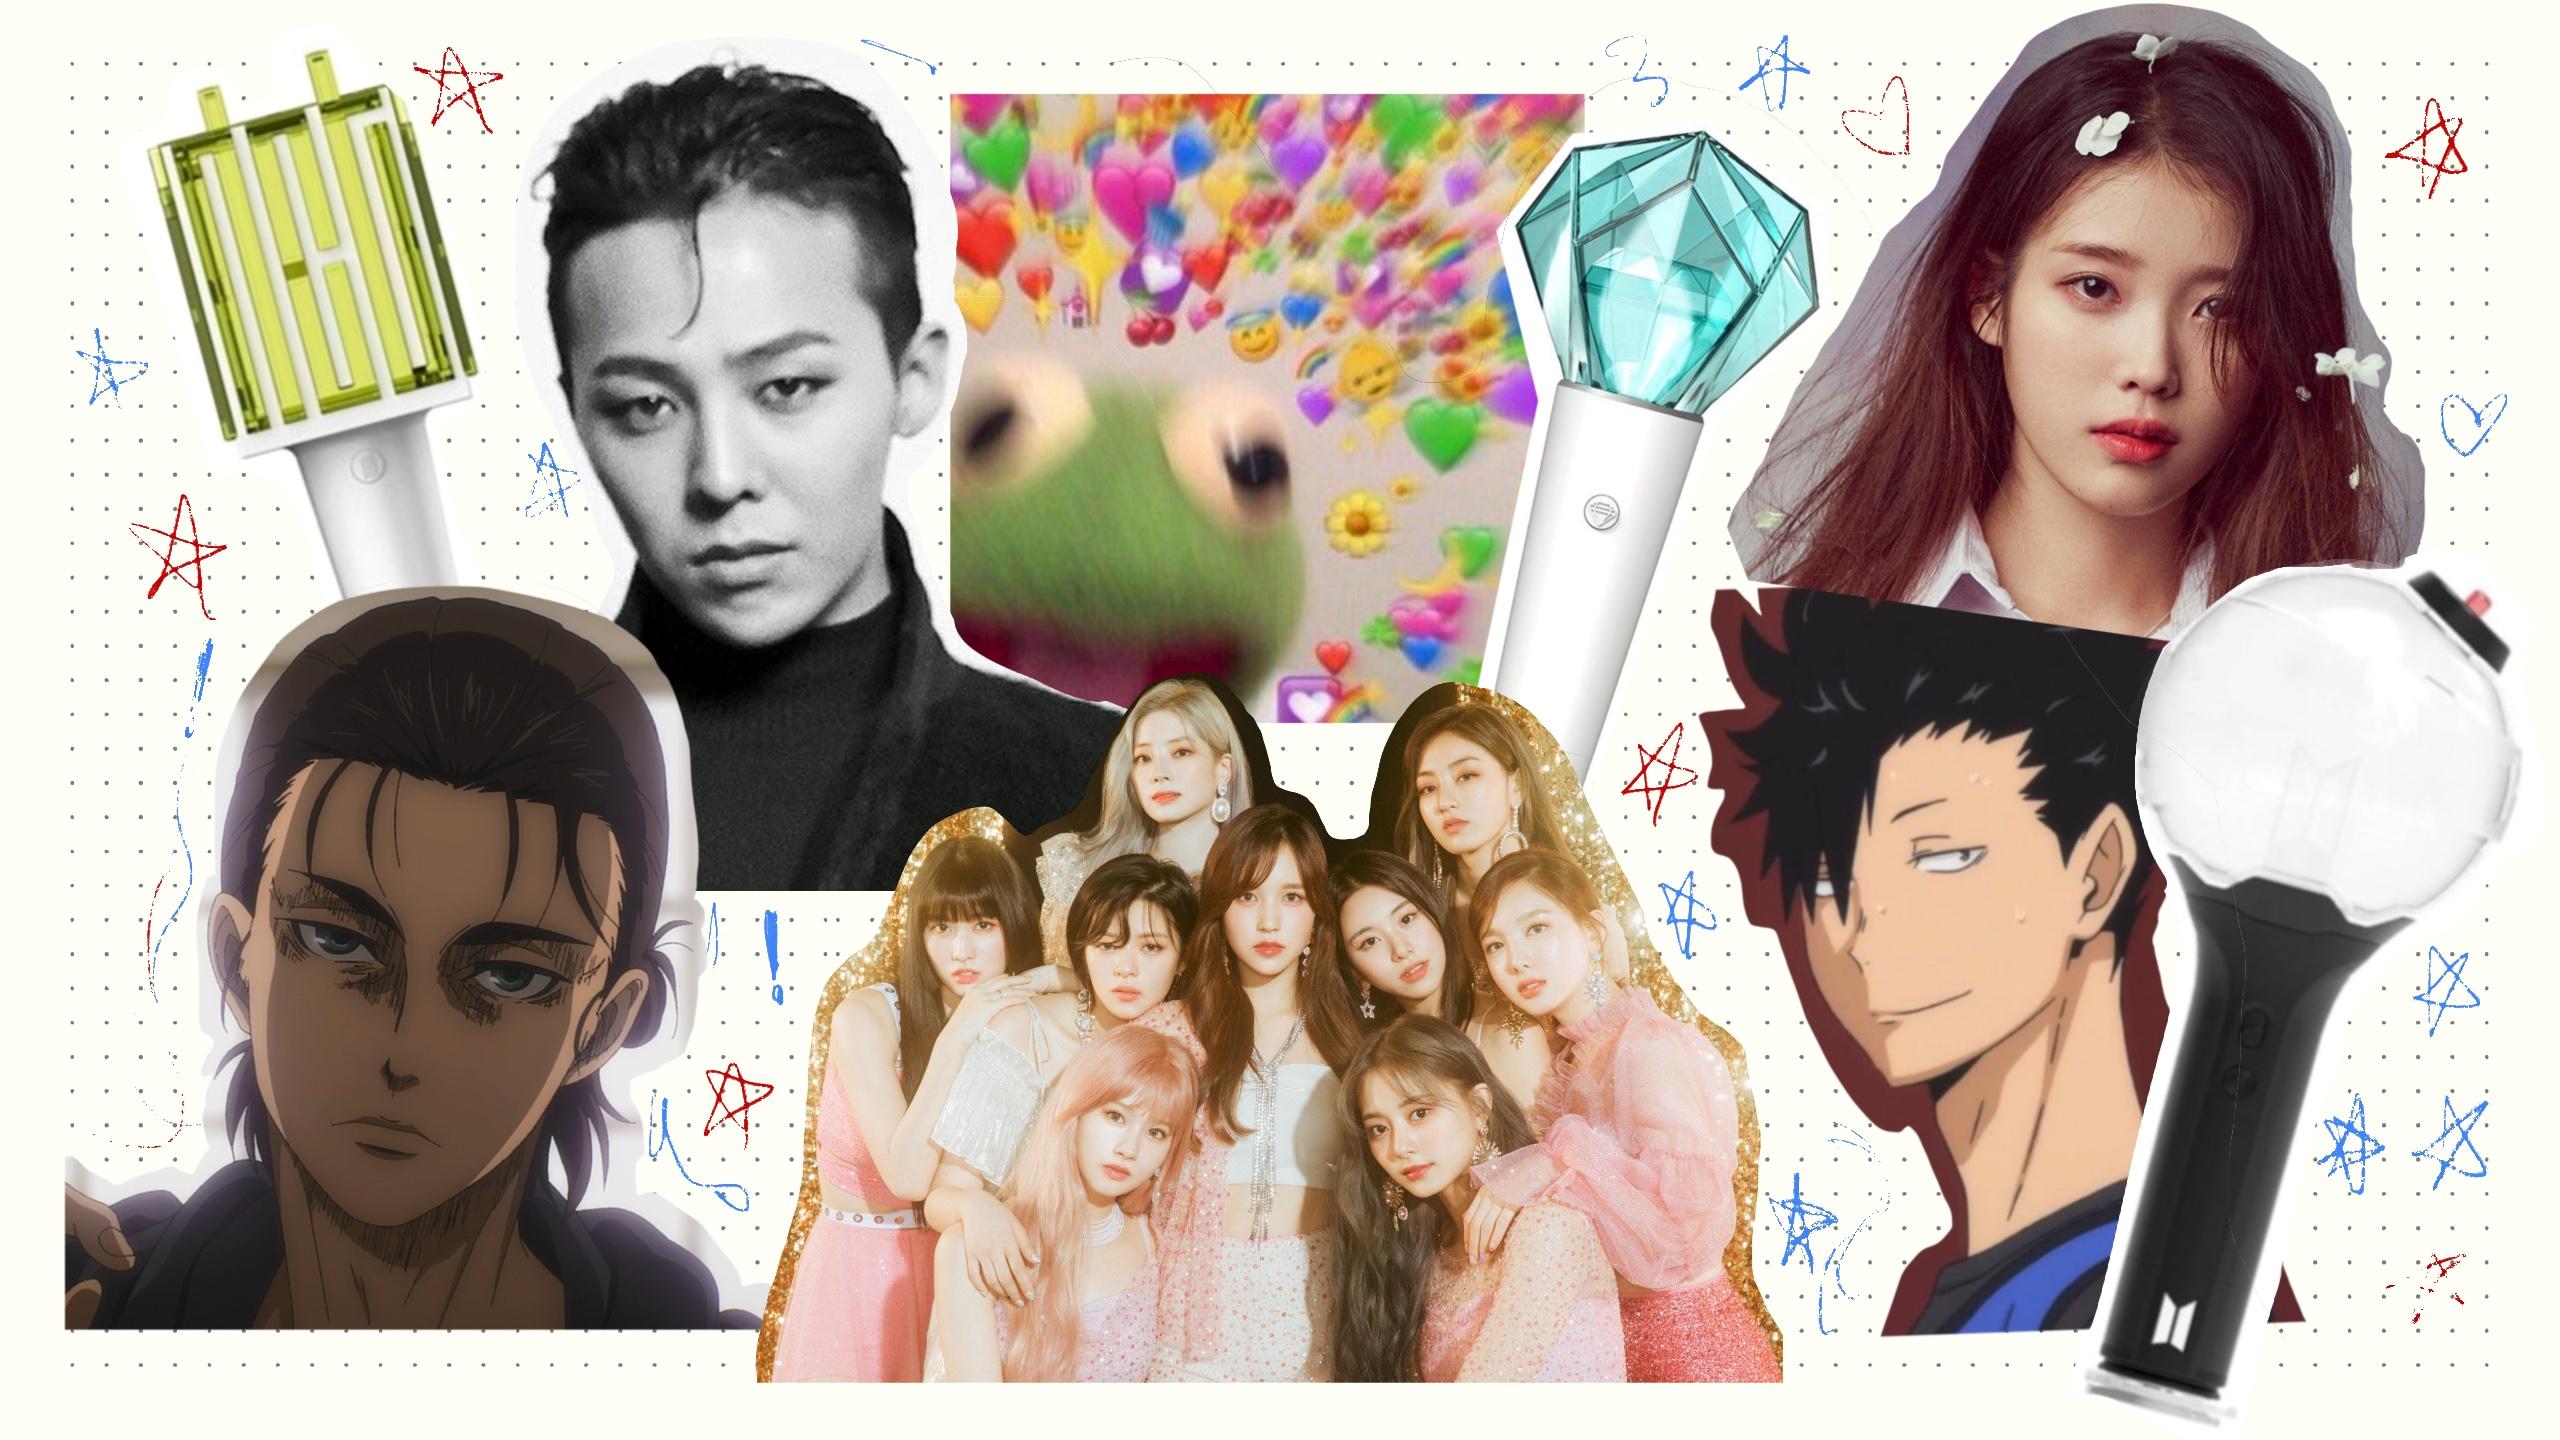 Collection of different k-pop artists and anime characters.